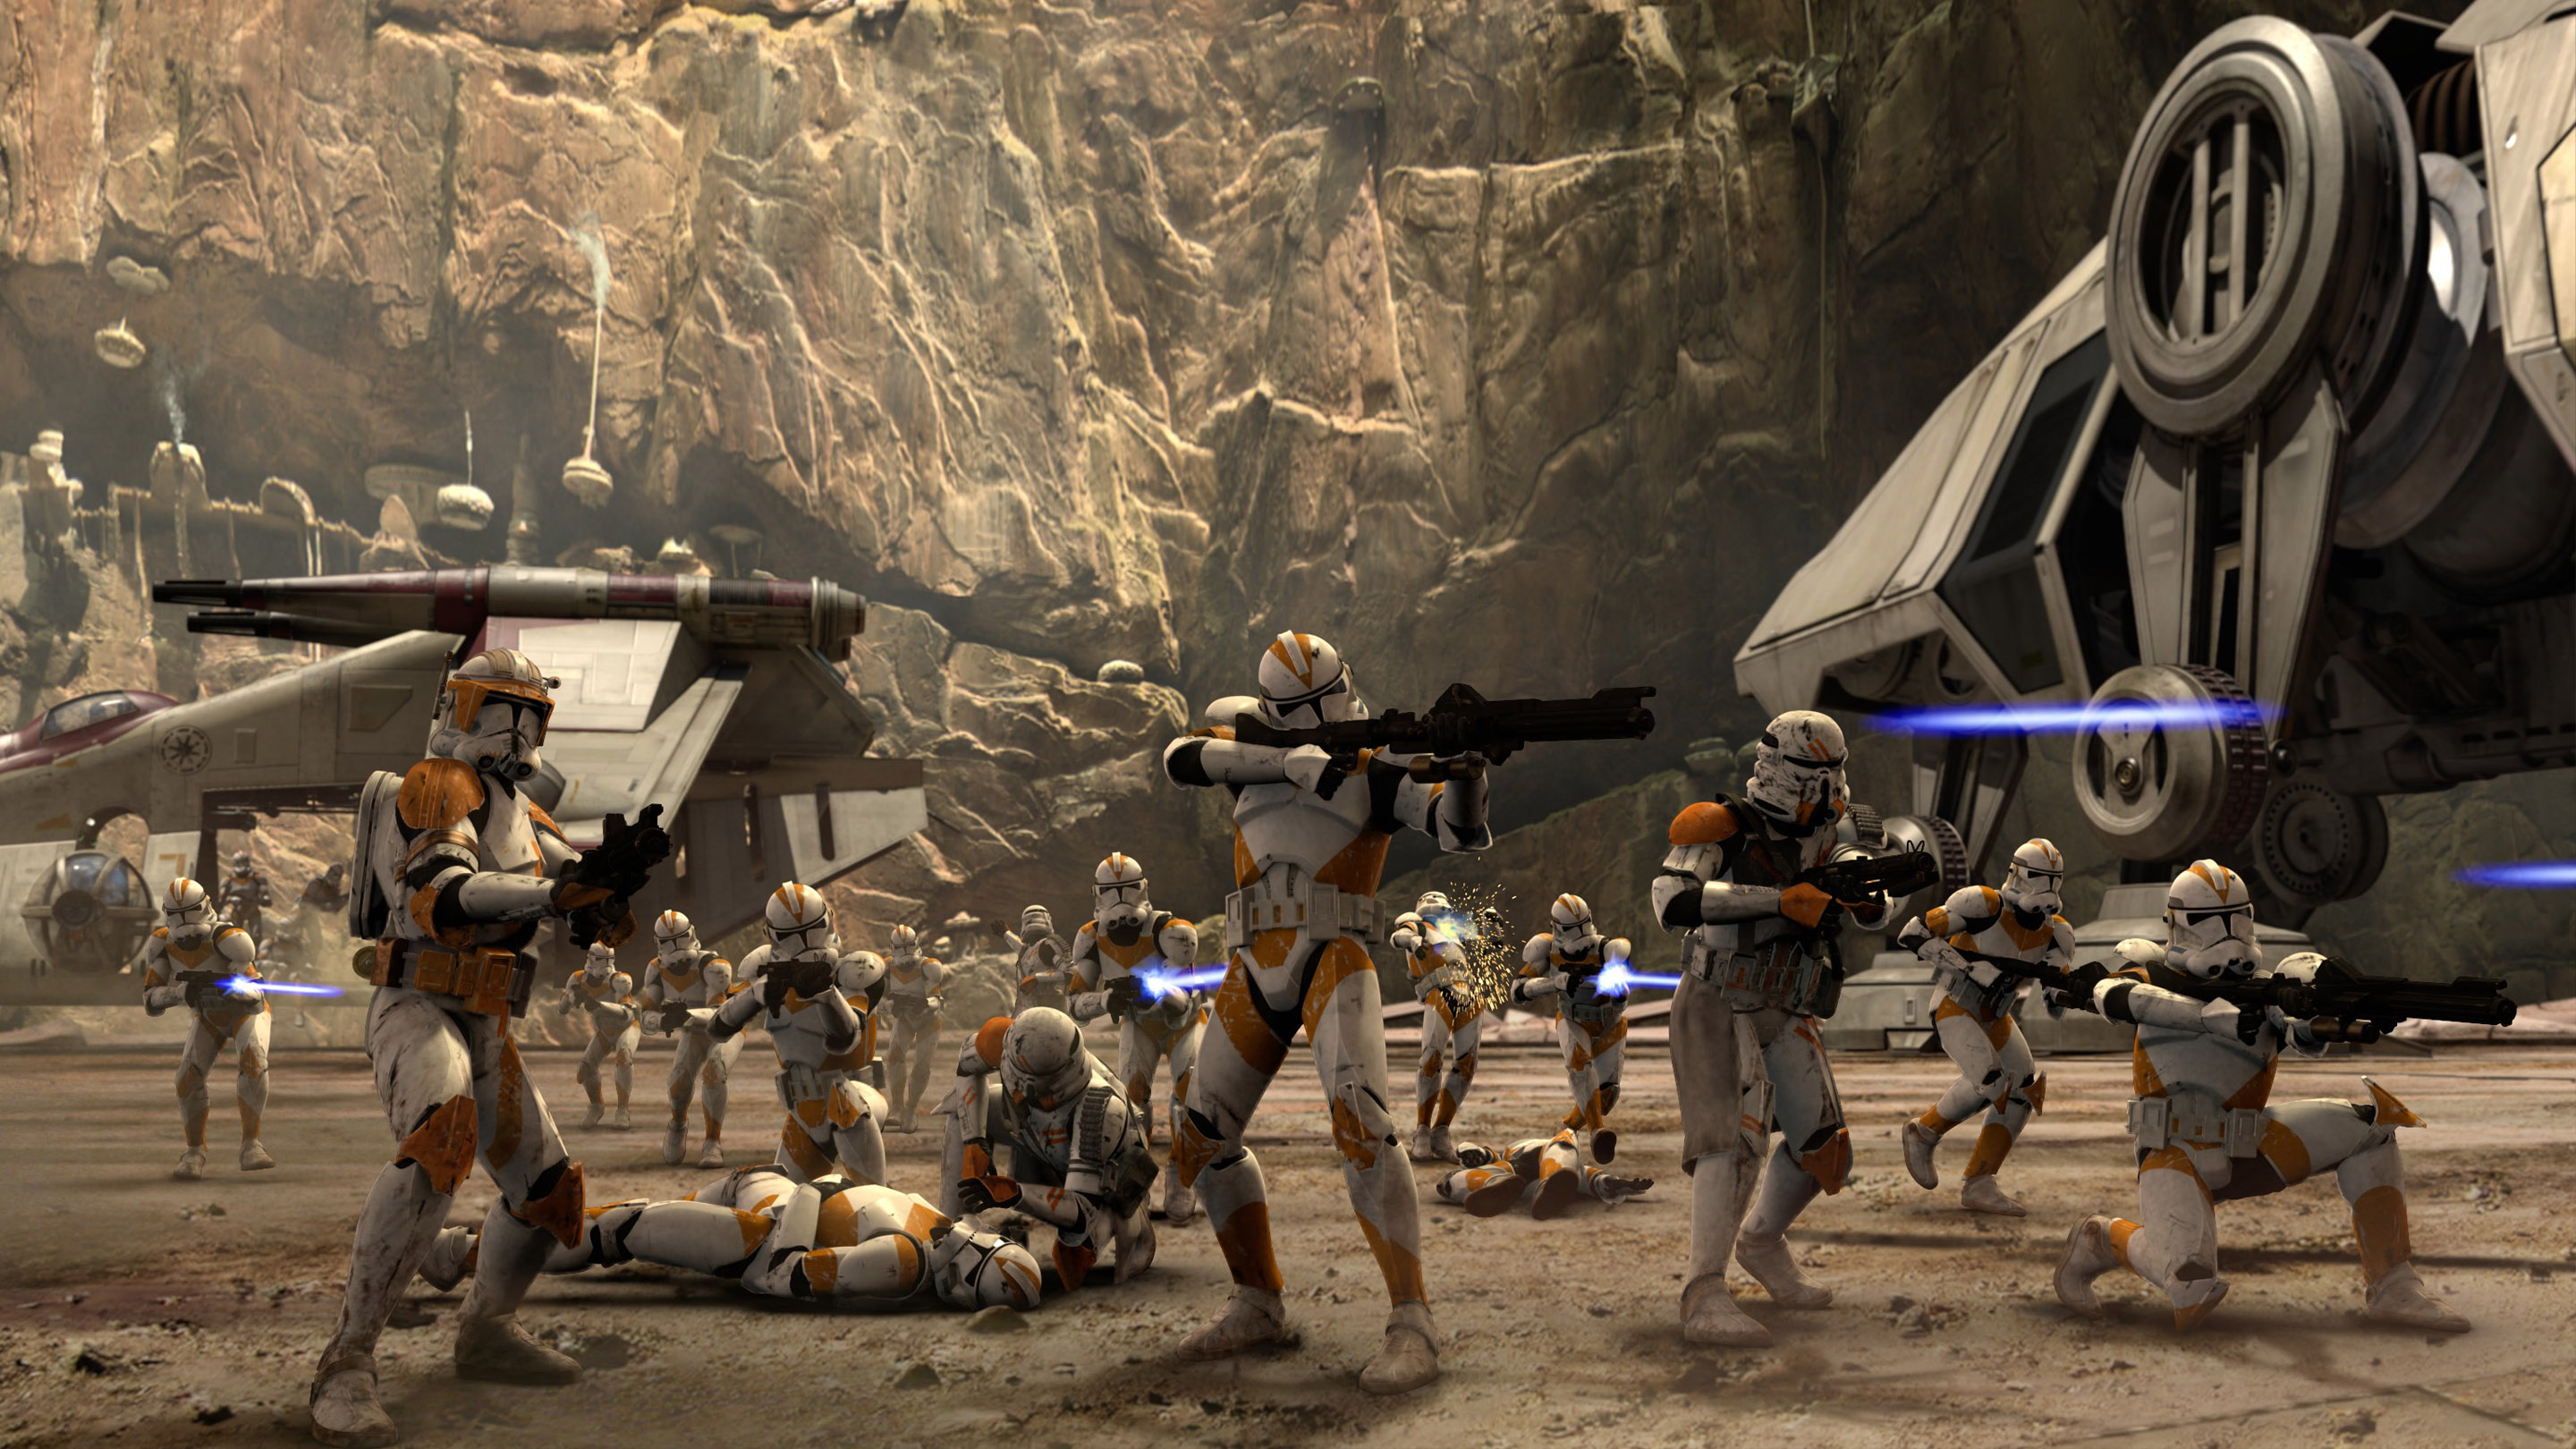 Star Wars Attack Battalion's Military Unit Of Branch Officers Who Serve The Galactic Republic., Wallpaper13.com